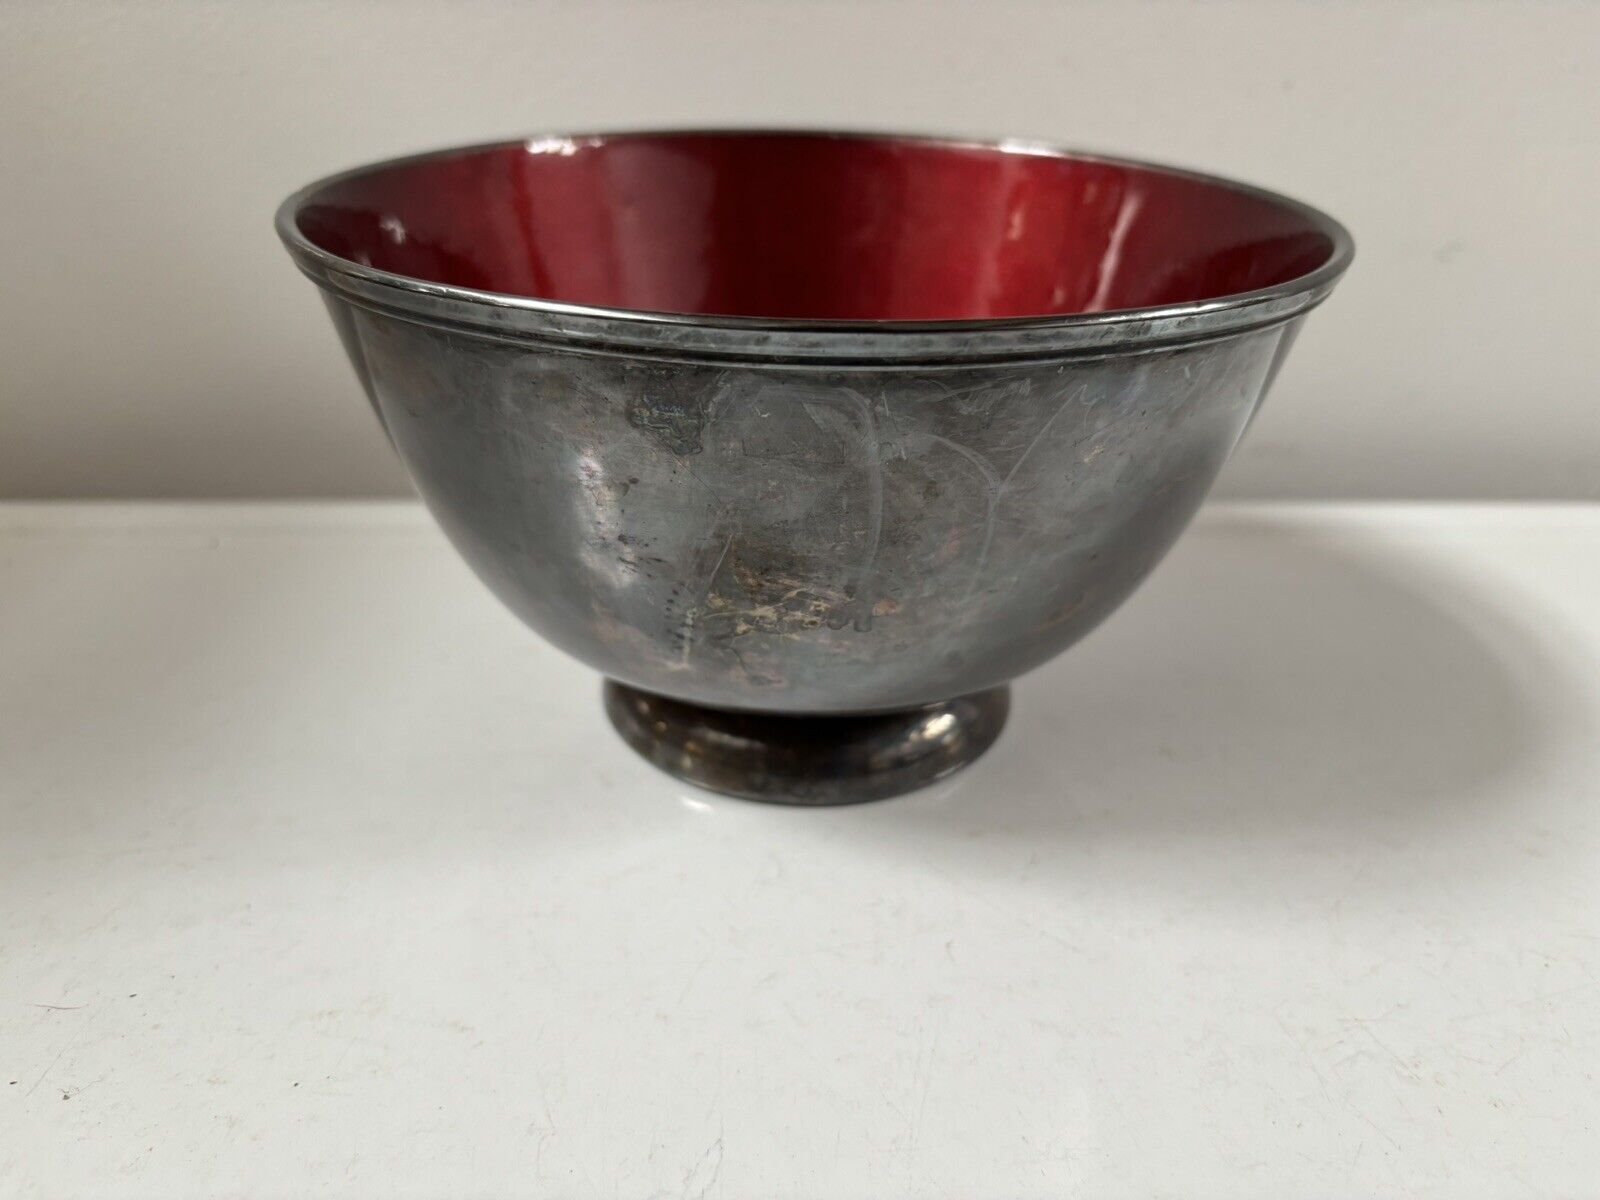 Silverplate Bowl Red Enamel EP #5003 Footed Paul Revere Towle Silversmiths